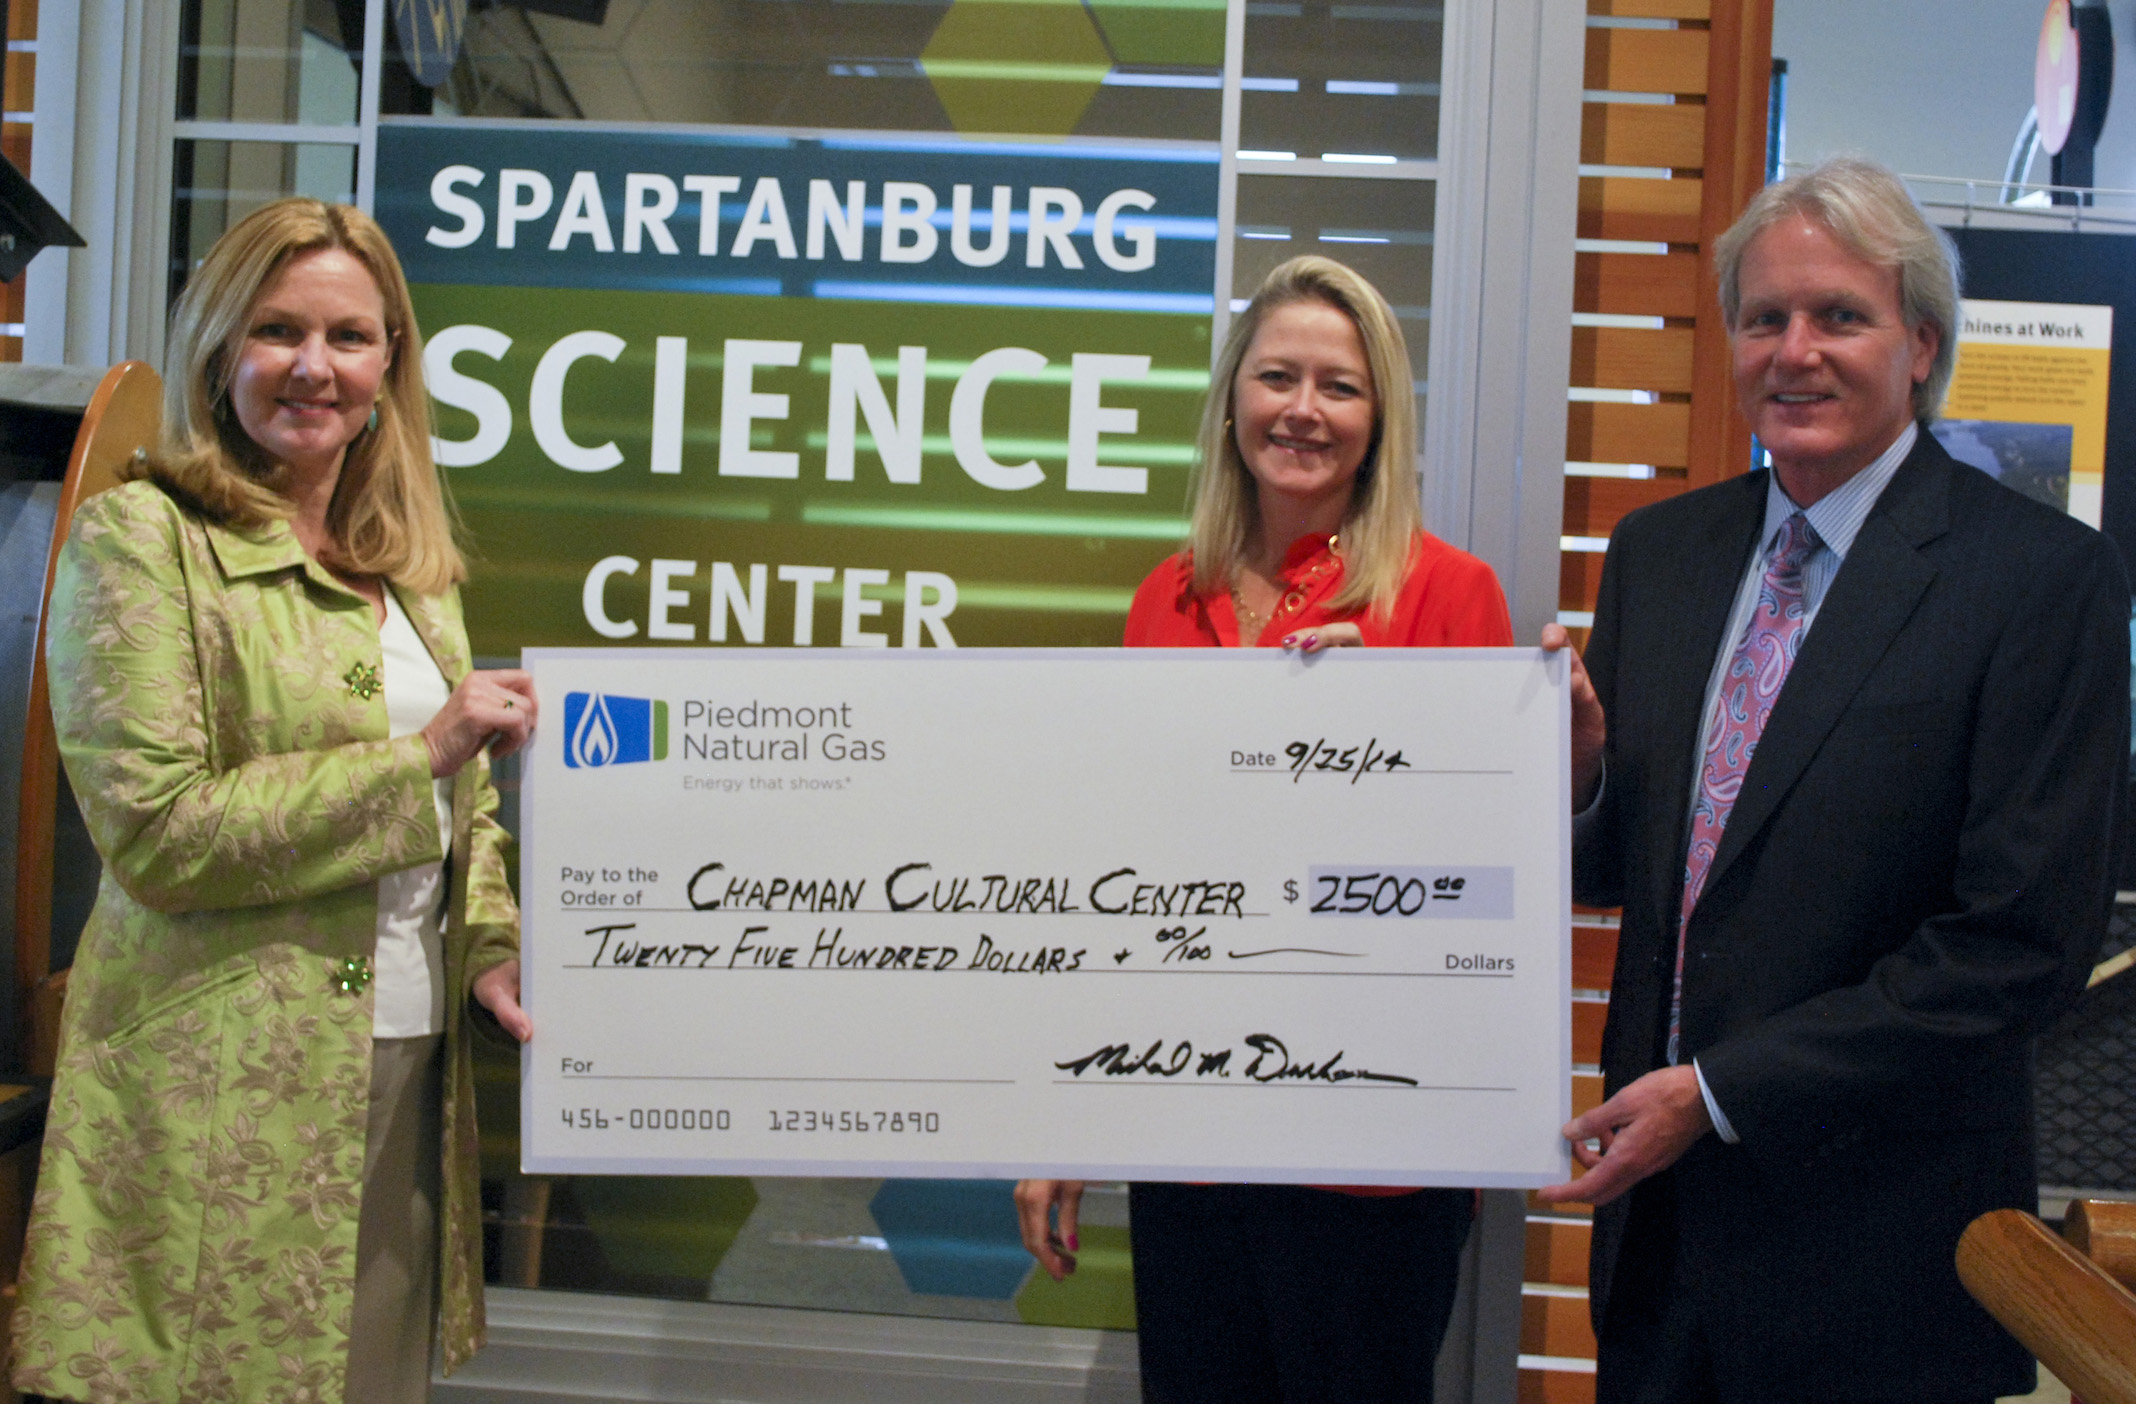 Chapman Cultural Center receives $2500 grant from Piedmont Natural Gas Foundation for education